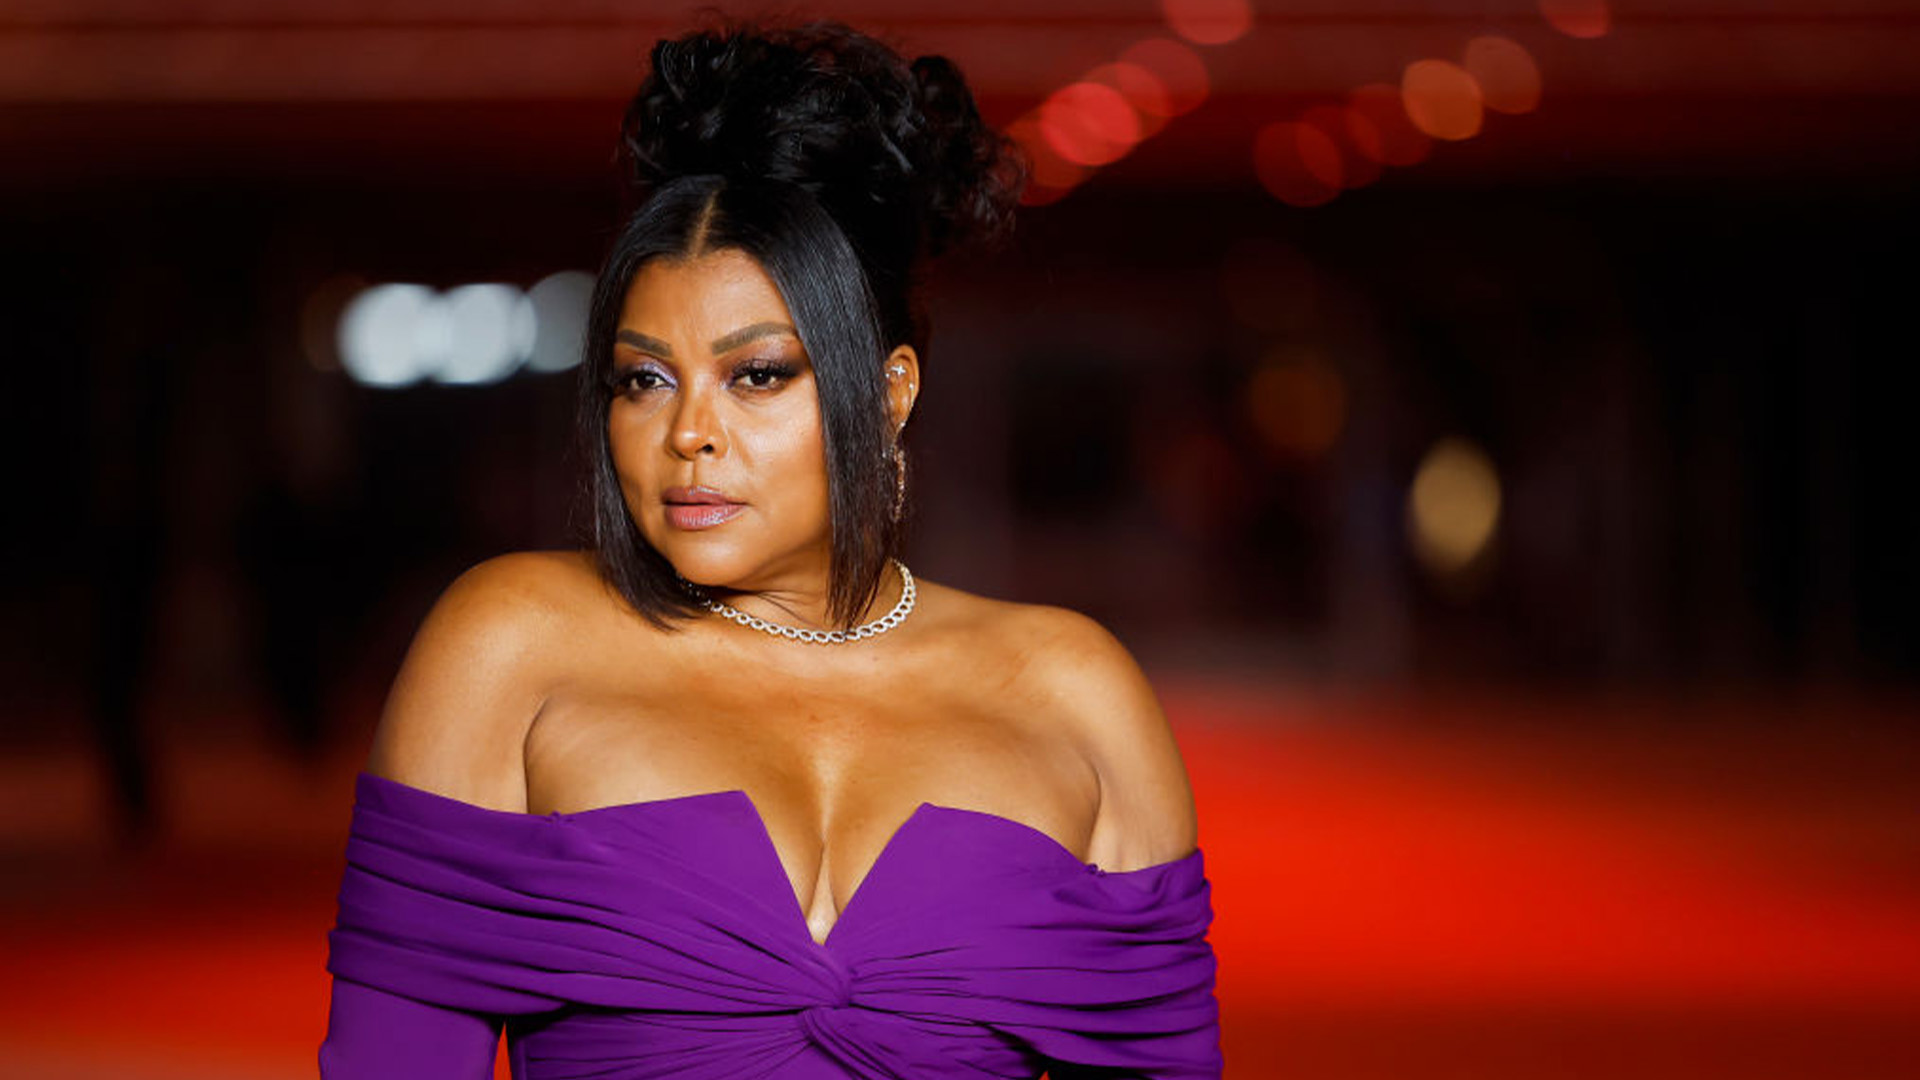 Taraji P. Henson Reveals She Was Offered $75K After Initially Requesting $500K For A Role That Later Earned Her An Oscar Nomination